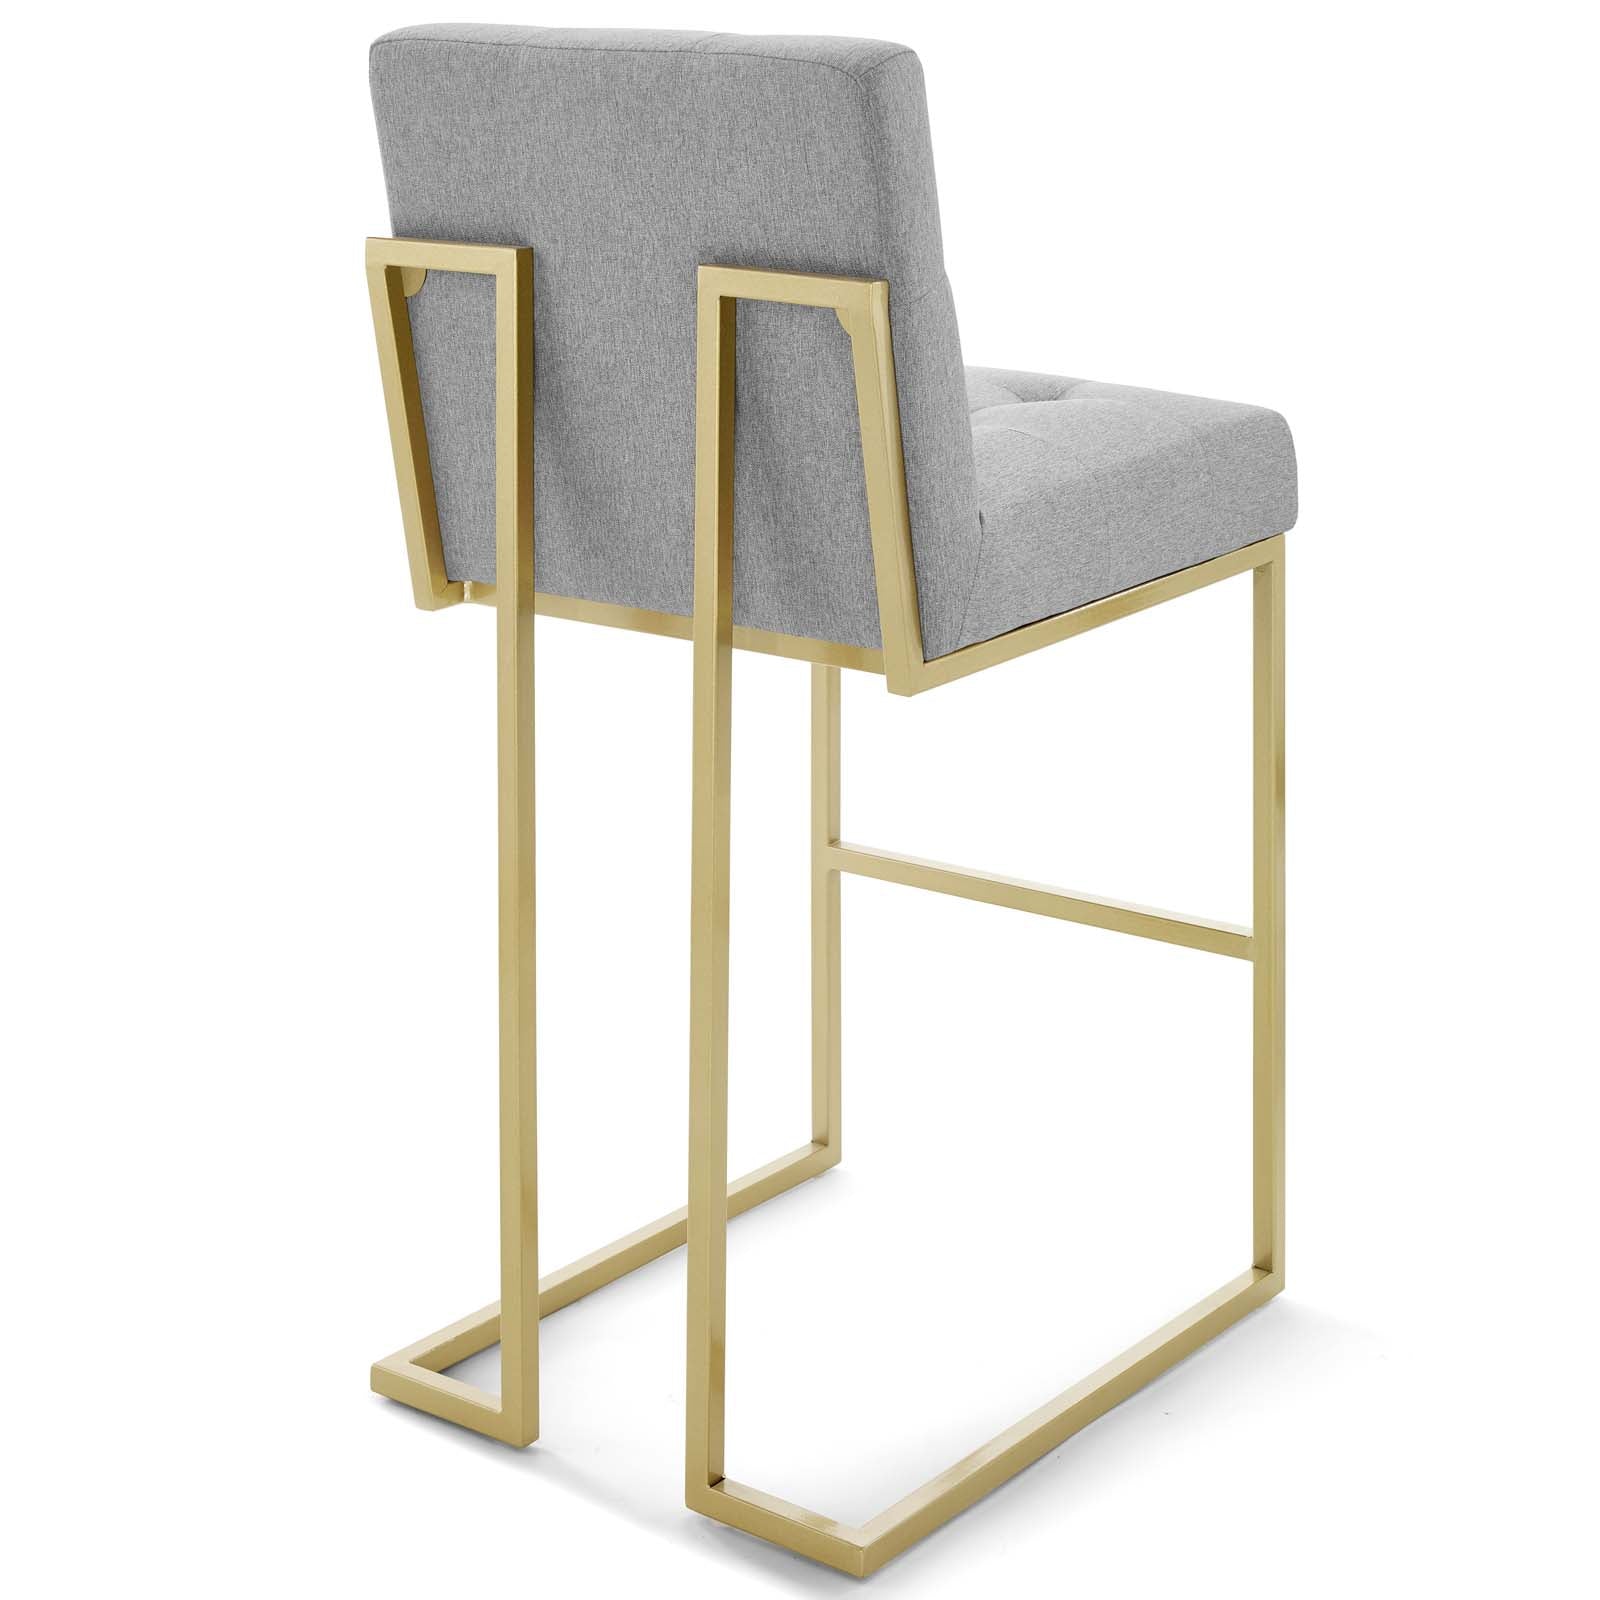 Modway Barstools - Privy Gold Stainless Steel Upholstered Fabric Bar Stool Gold Light Gray